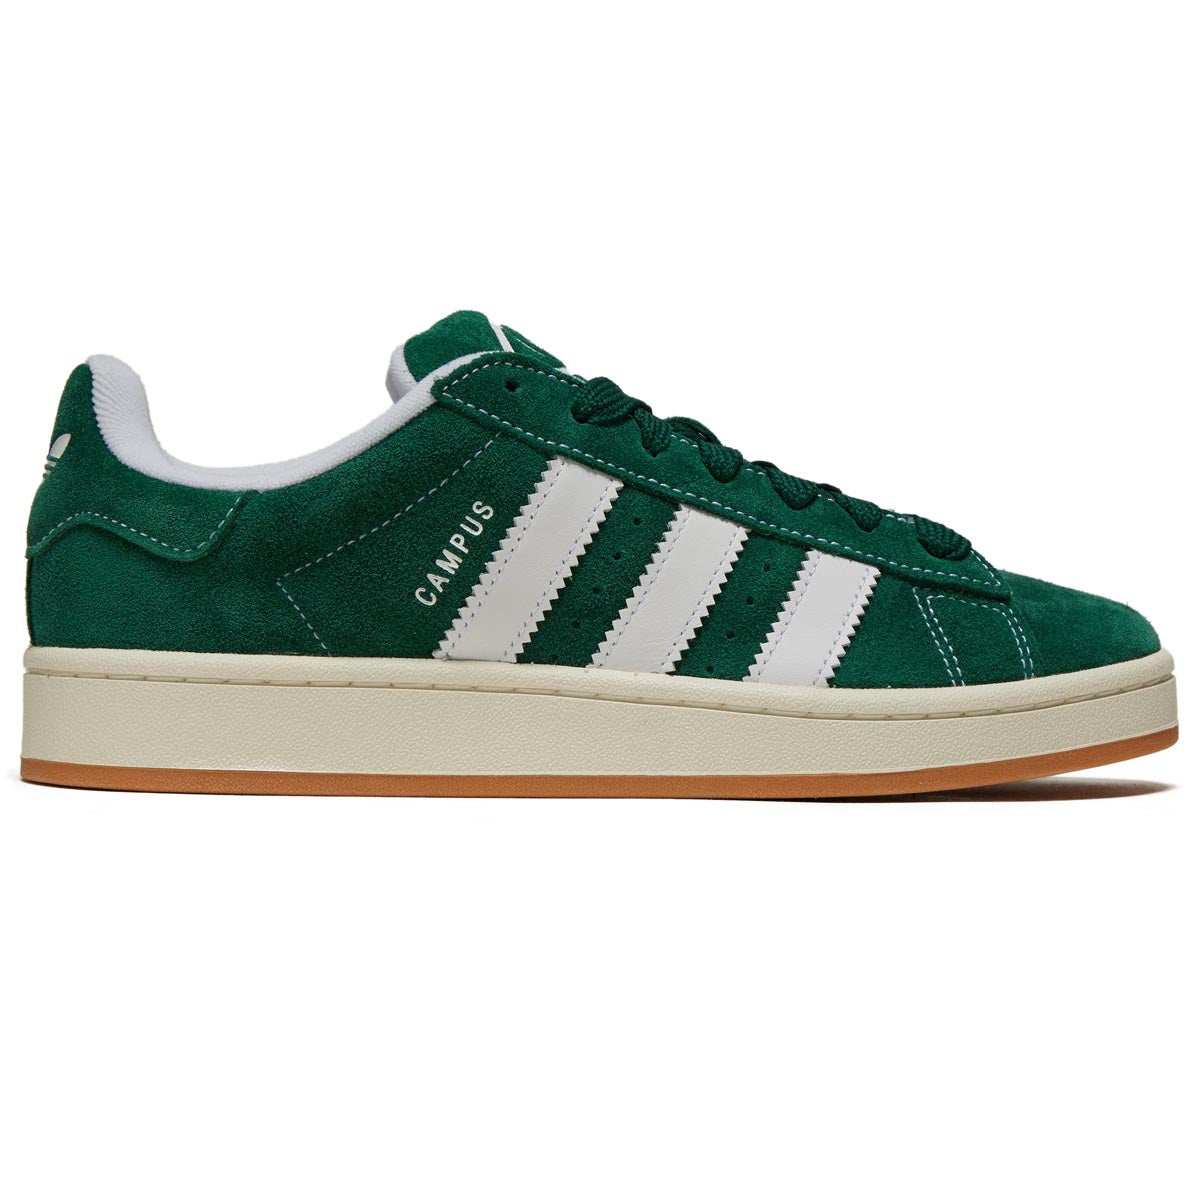 Adidas Campus 00s Shoes - Dark Green/Ftwr White/Off White image 1